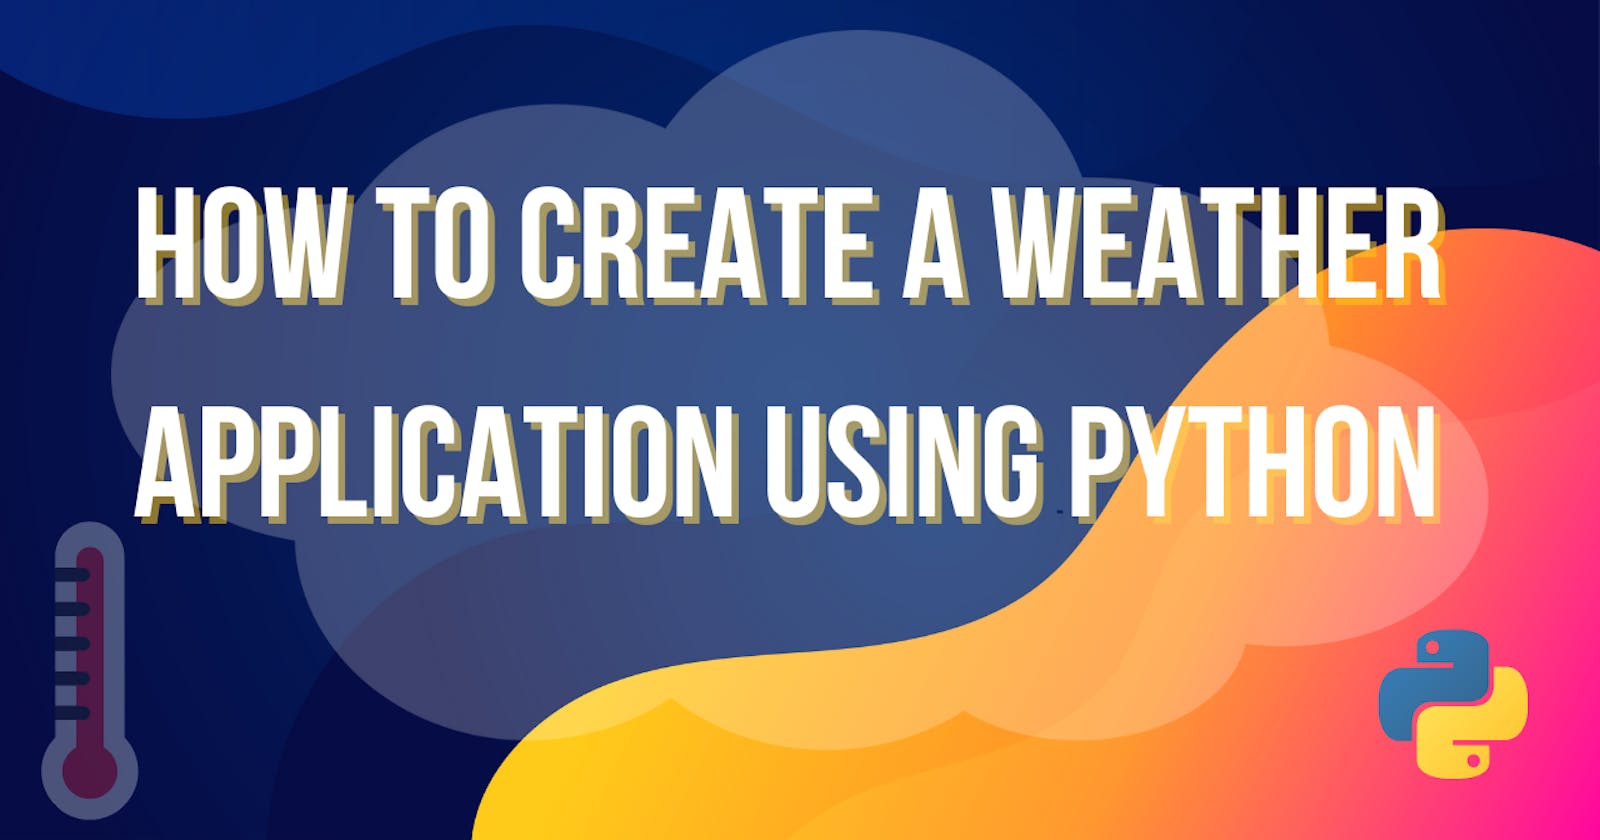 How to create a weather application using python